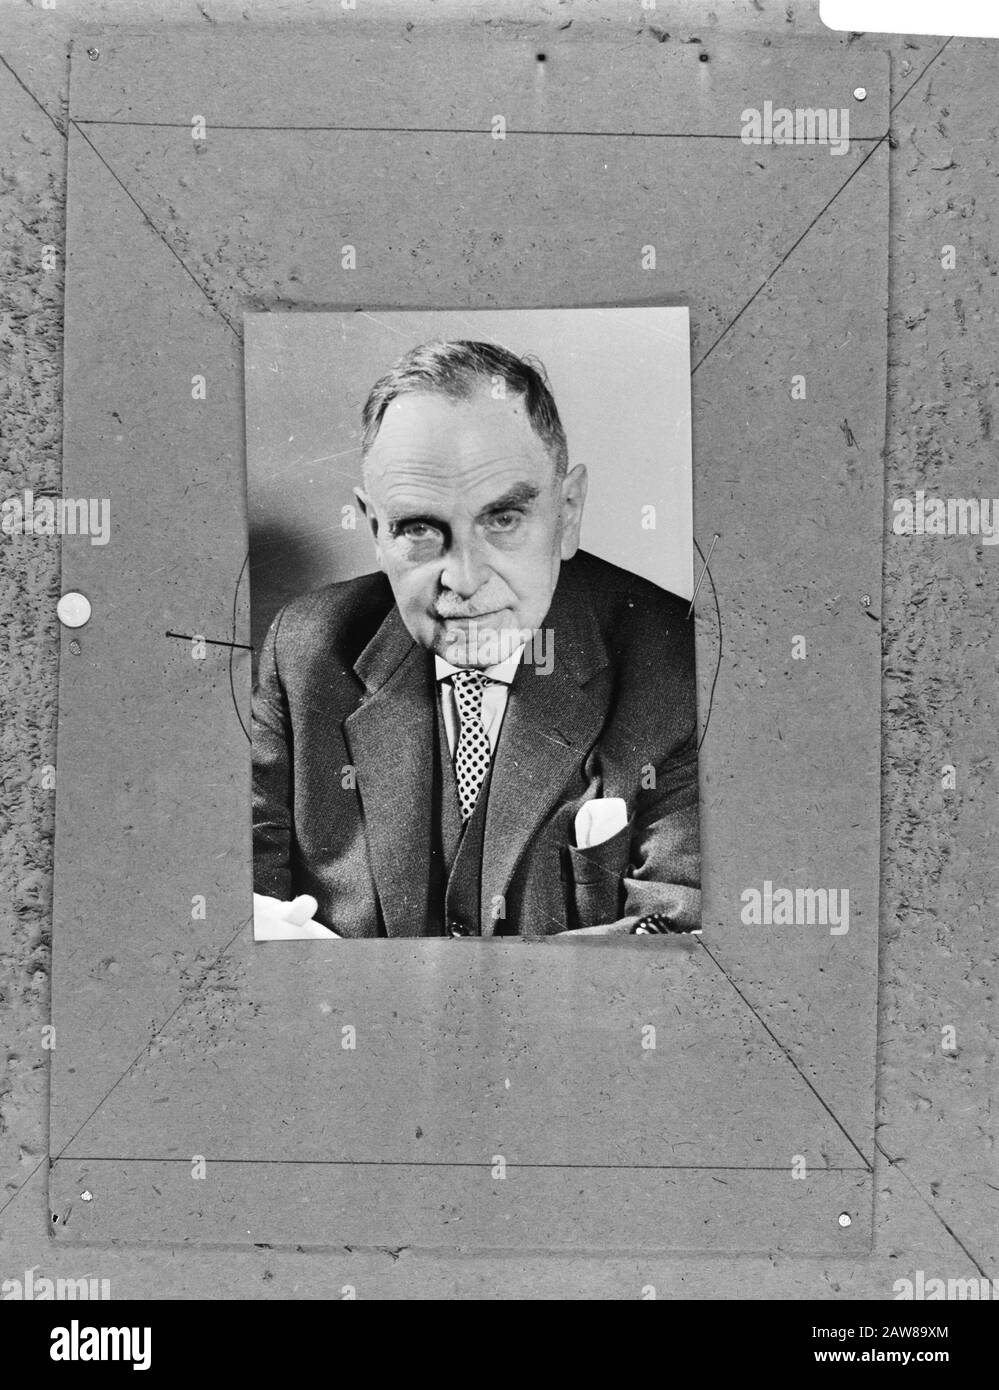 Prof. Otto Hahn (1879-1968), discoverer of nuclear fission. Nobel laureate Chemistry 1944 Annotation: Repro Negative Date: April 16, 1970 Location: Austria Keywords: Nobel Prize for chemistry, nuclear physicists, portraits Person Name: Hahn, Otto Stock Photo